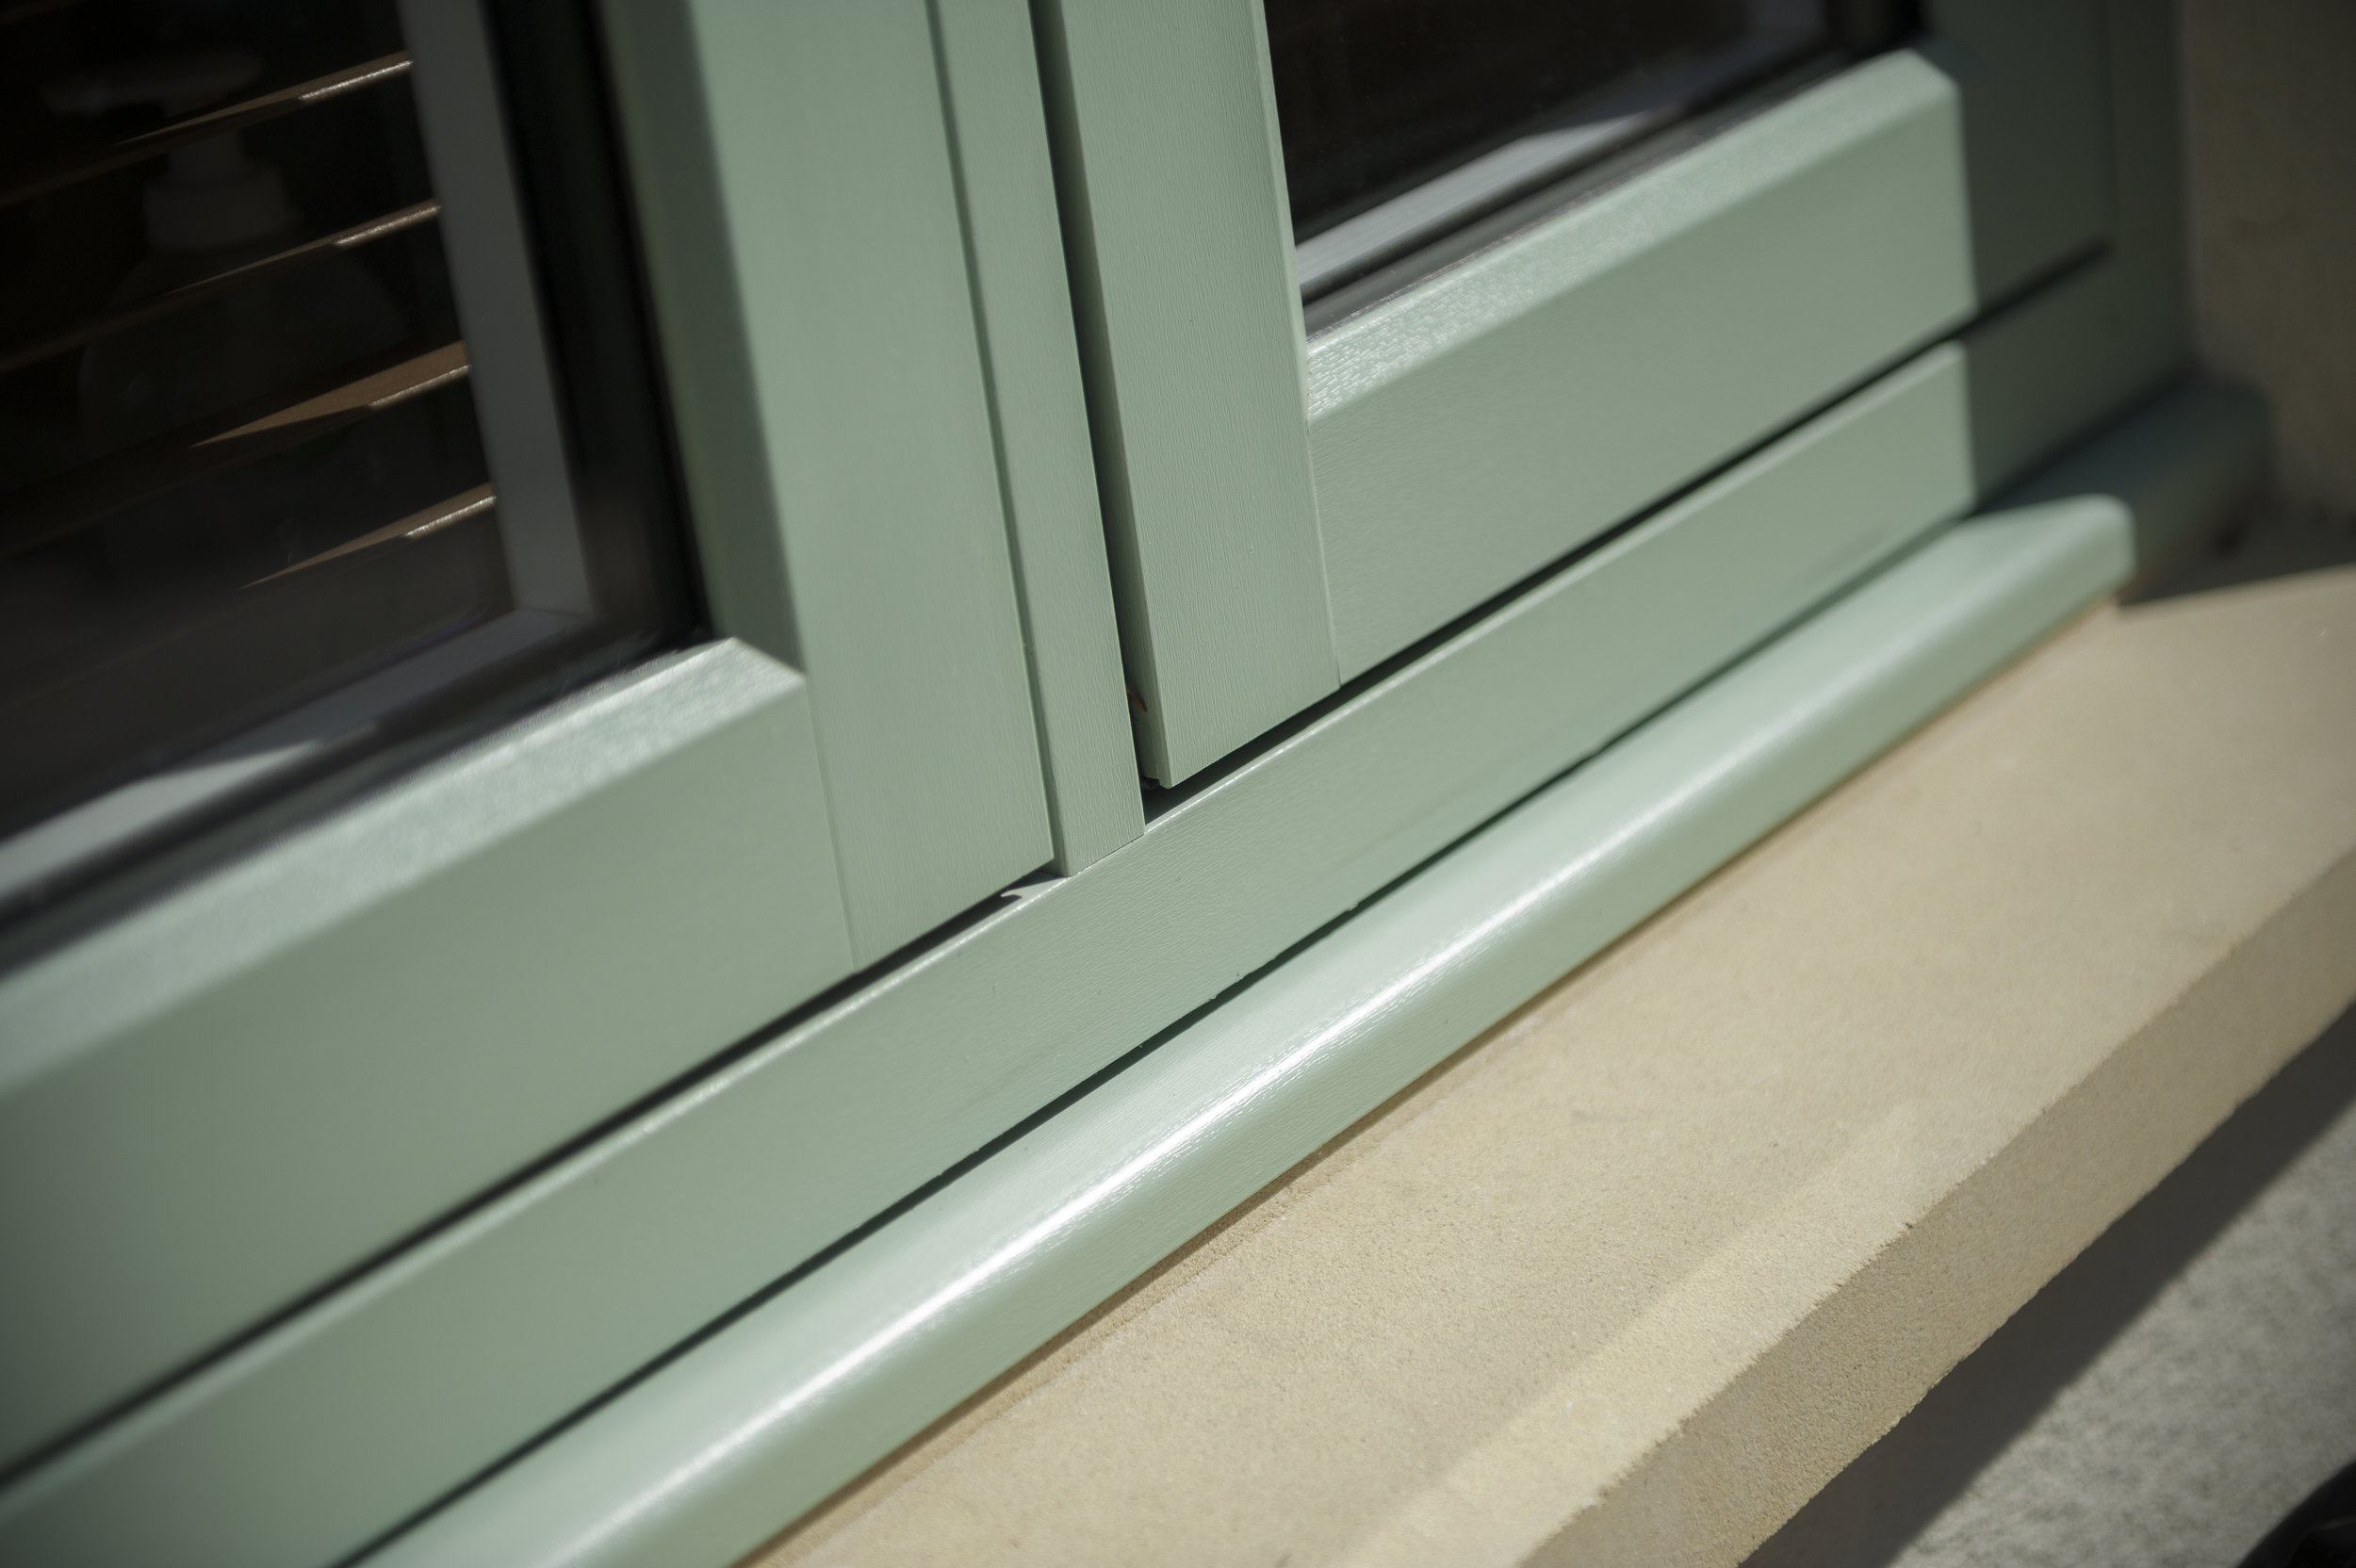 FIND OUT MORE ABOUT FLUSH FITTING WINDOWS